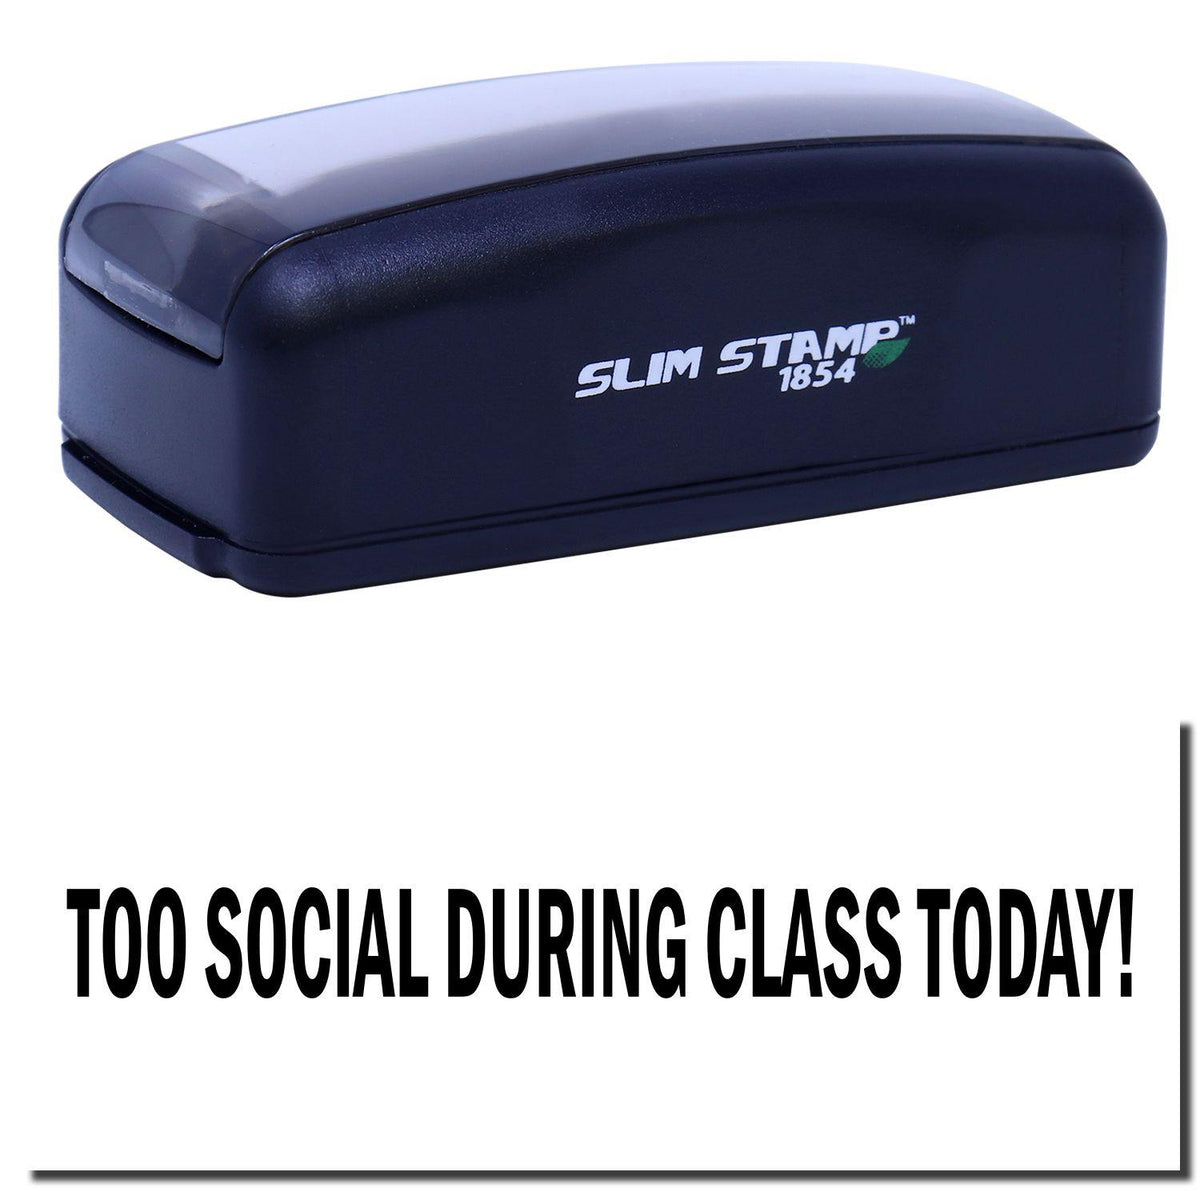 A stock office pre-inked stamp with a stamped image showing how the text &quot;TOO SOCIAL DURING CLASS TODAY!&quot; in a large font is displayed after stamping.